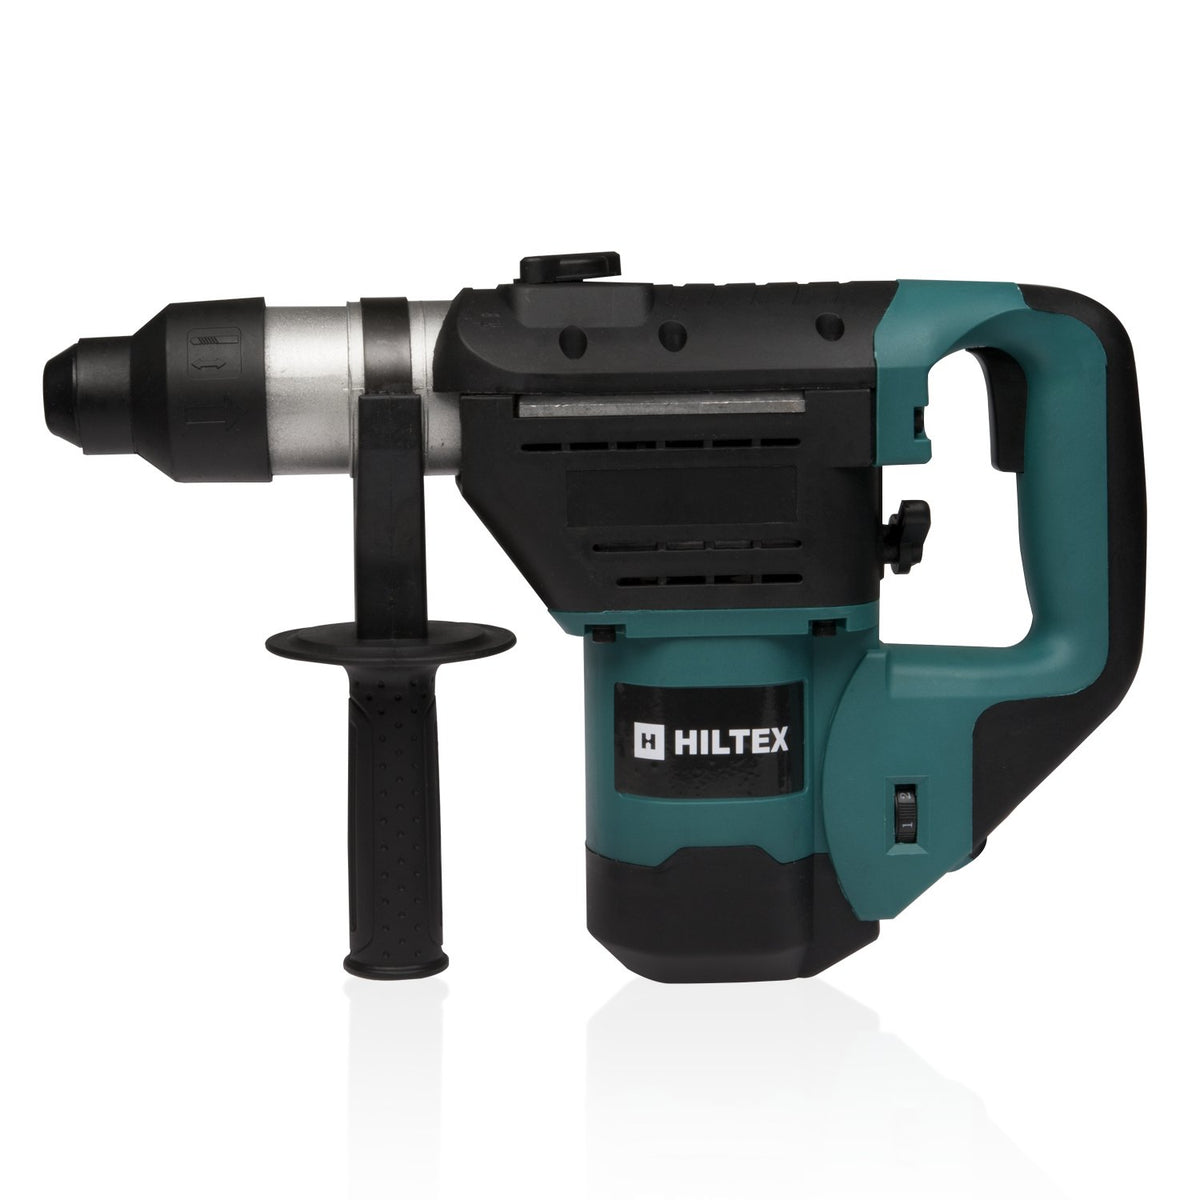 1-1/2 Inch SDS Rotary Hammer Drill | Includes Demolition Bits, Flat and Point Chisels